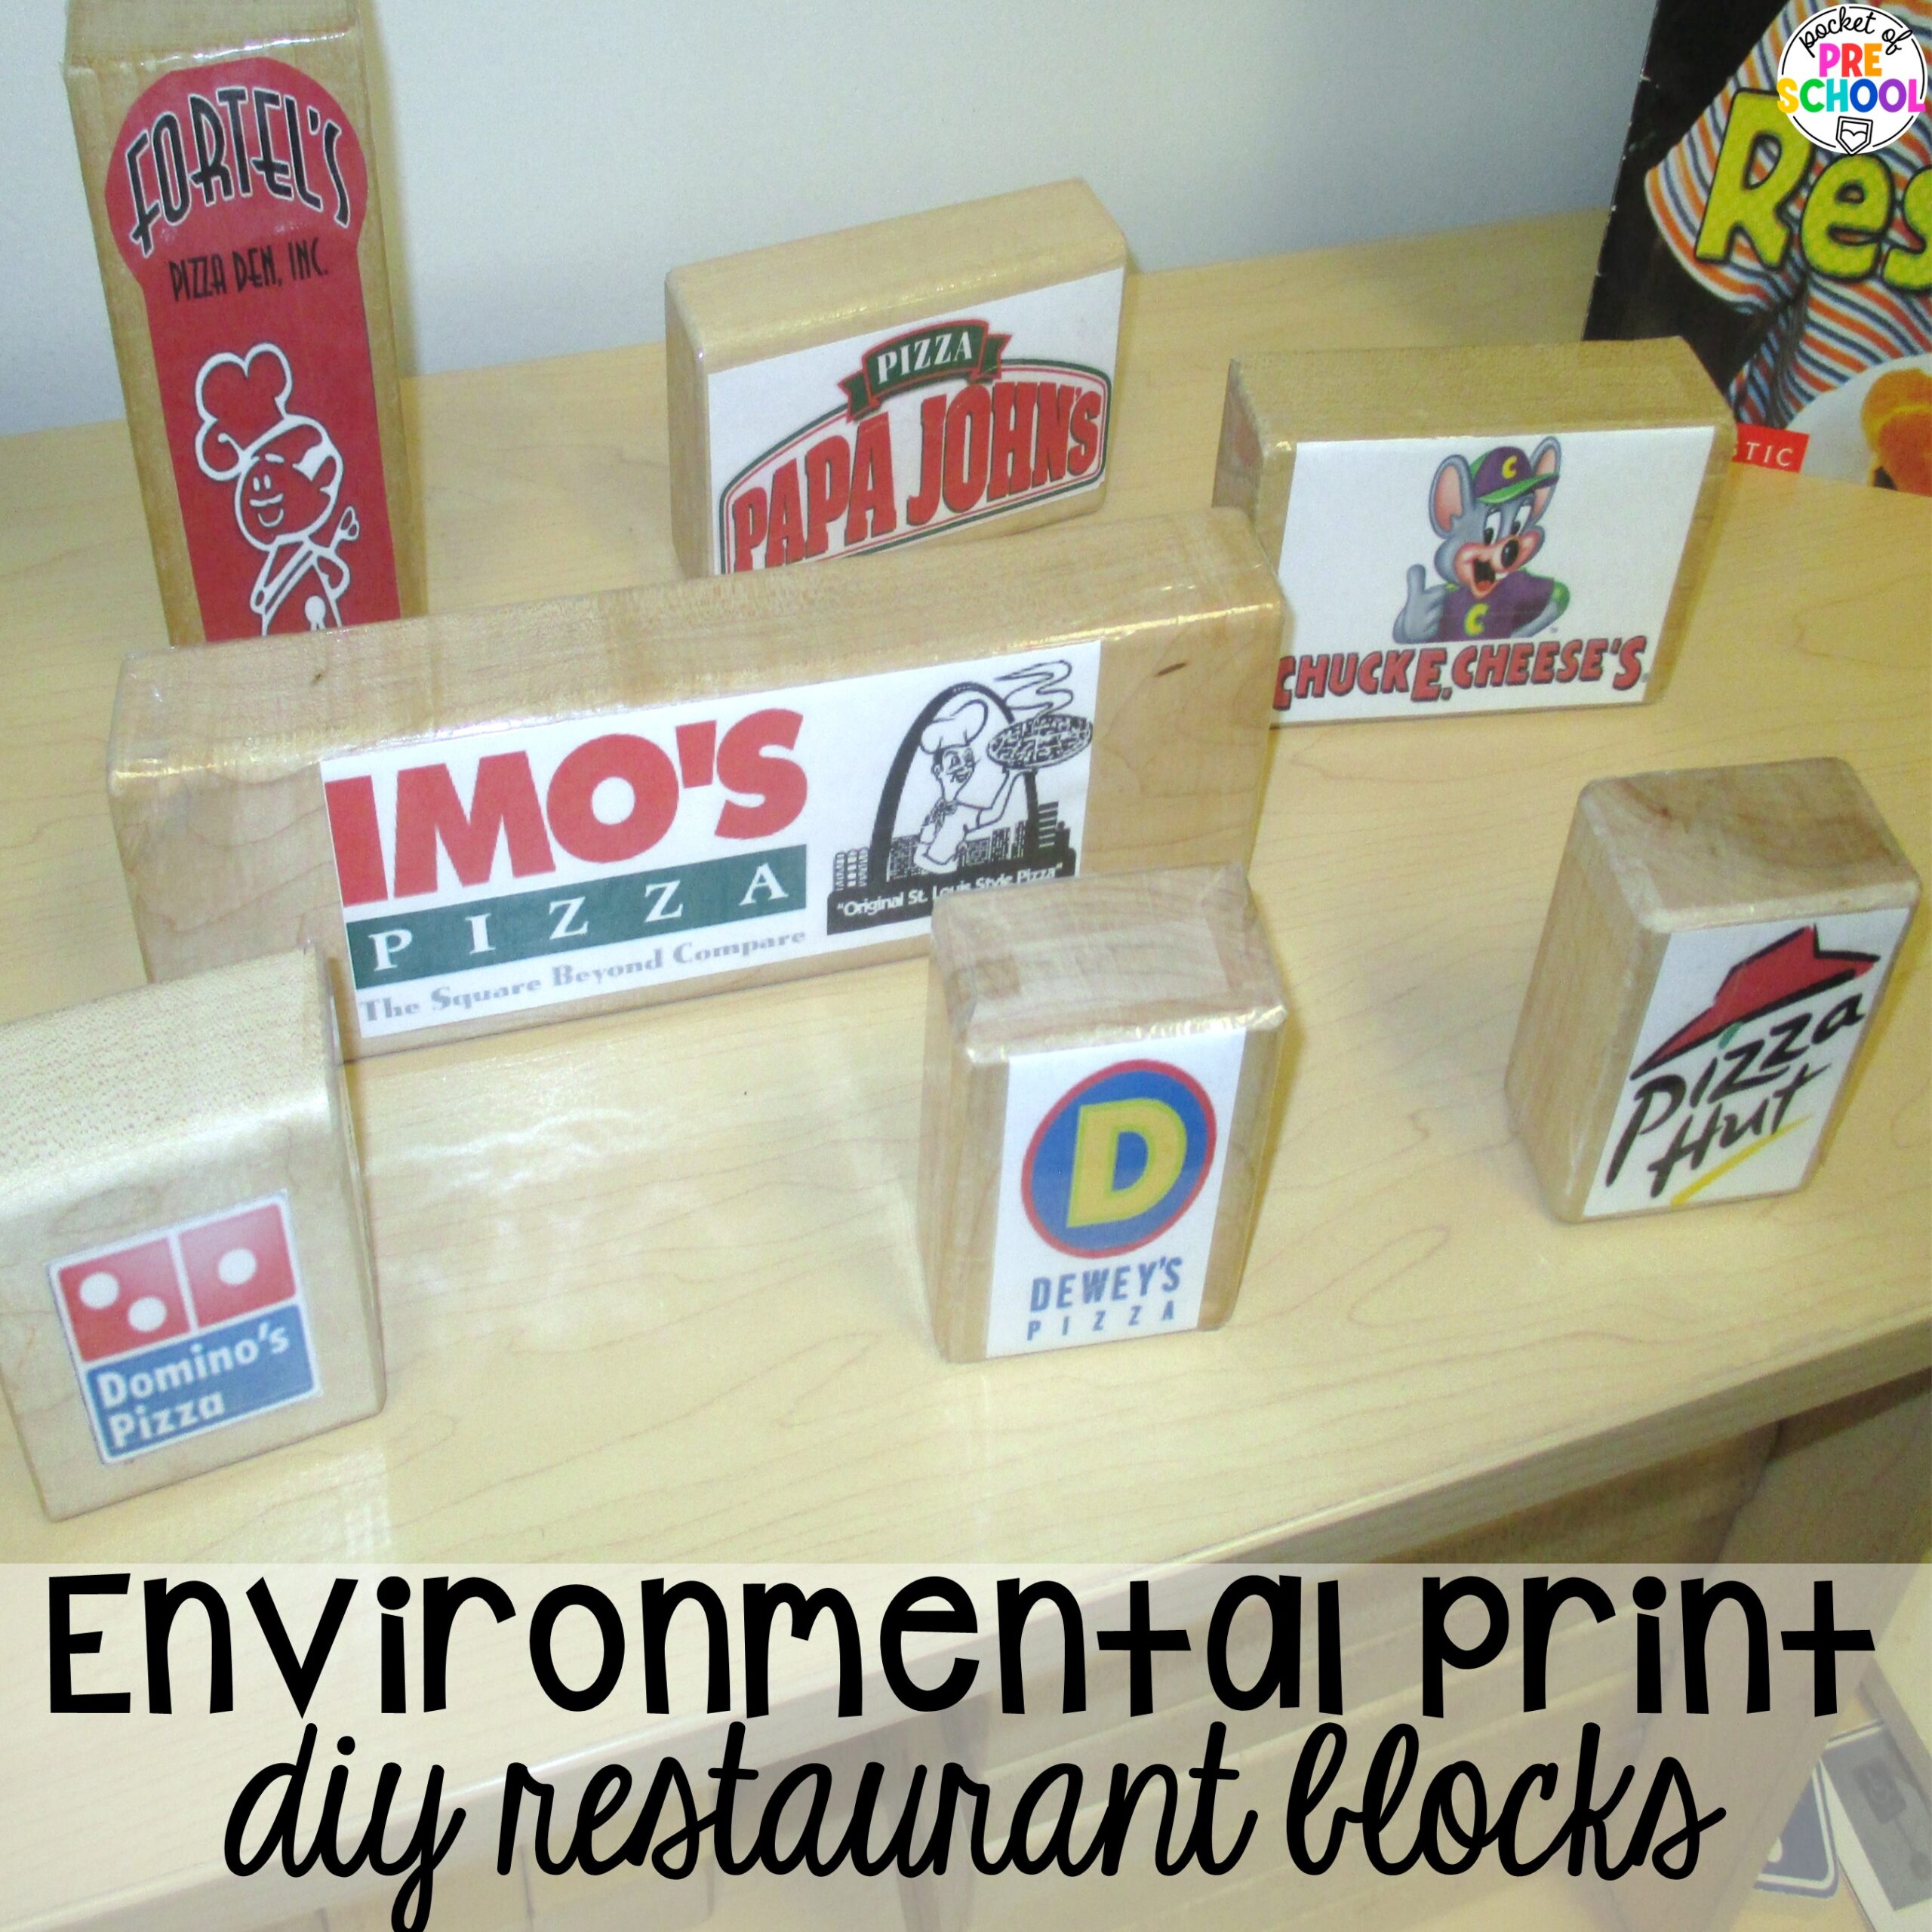 Environmental print DIY restaurant blocks. Check out this post for over 15 ideas to use environmental print in the preschool, pre-k, or kindergarten classroom.